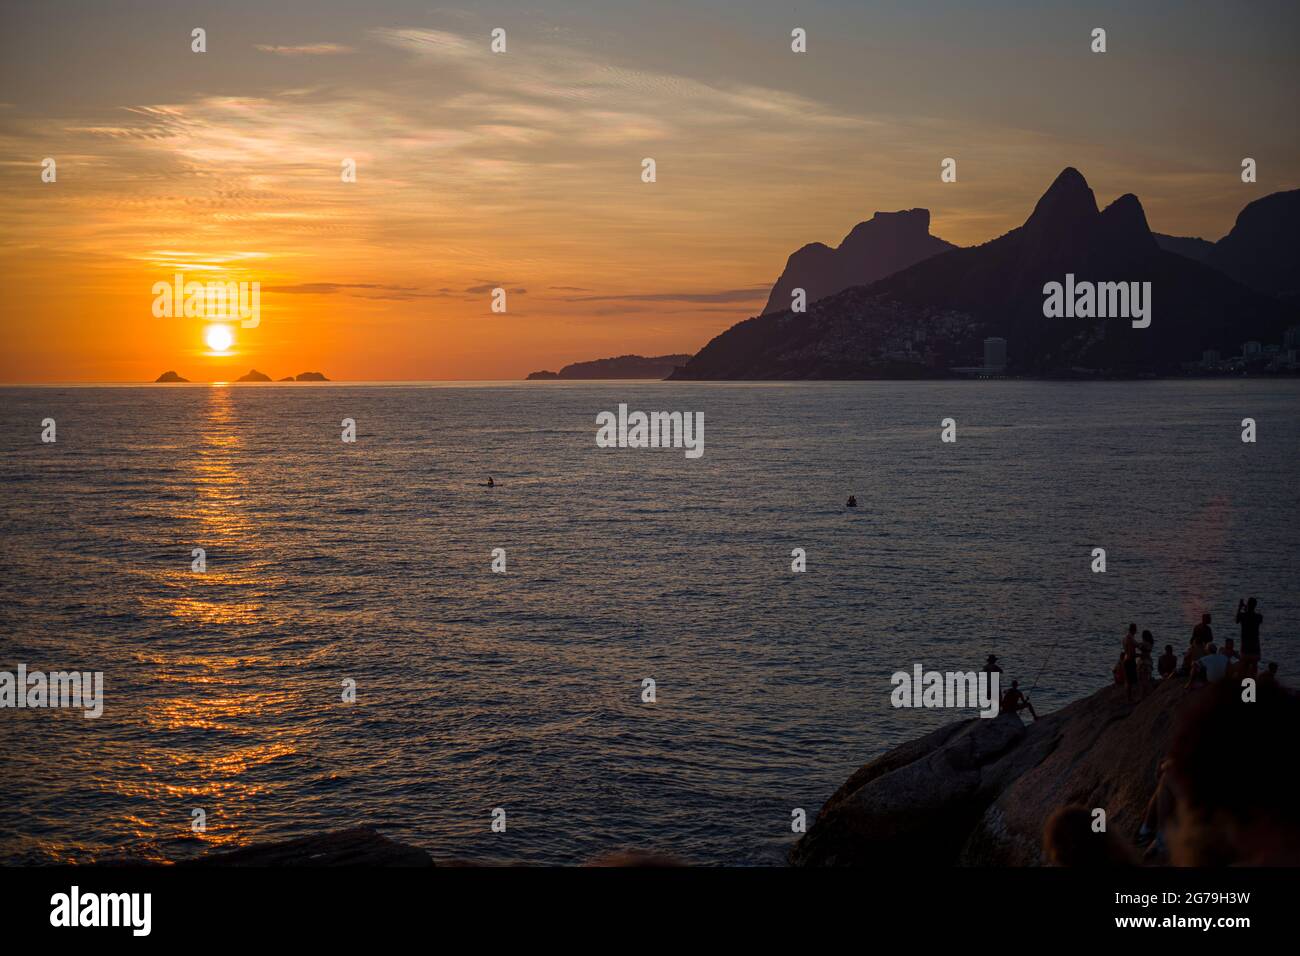 A magical place: People applaud when the sun sets at Arpoador rock with view of Ipanema beach and the Mountains of Morro Dois Irmaos and Leblon in the back. Camera: Leica M10 Stock Photo